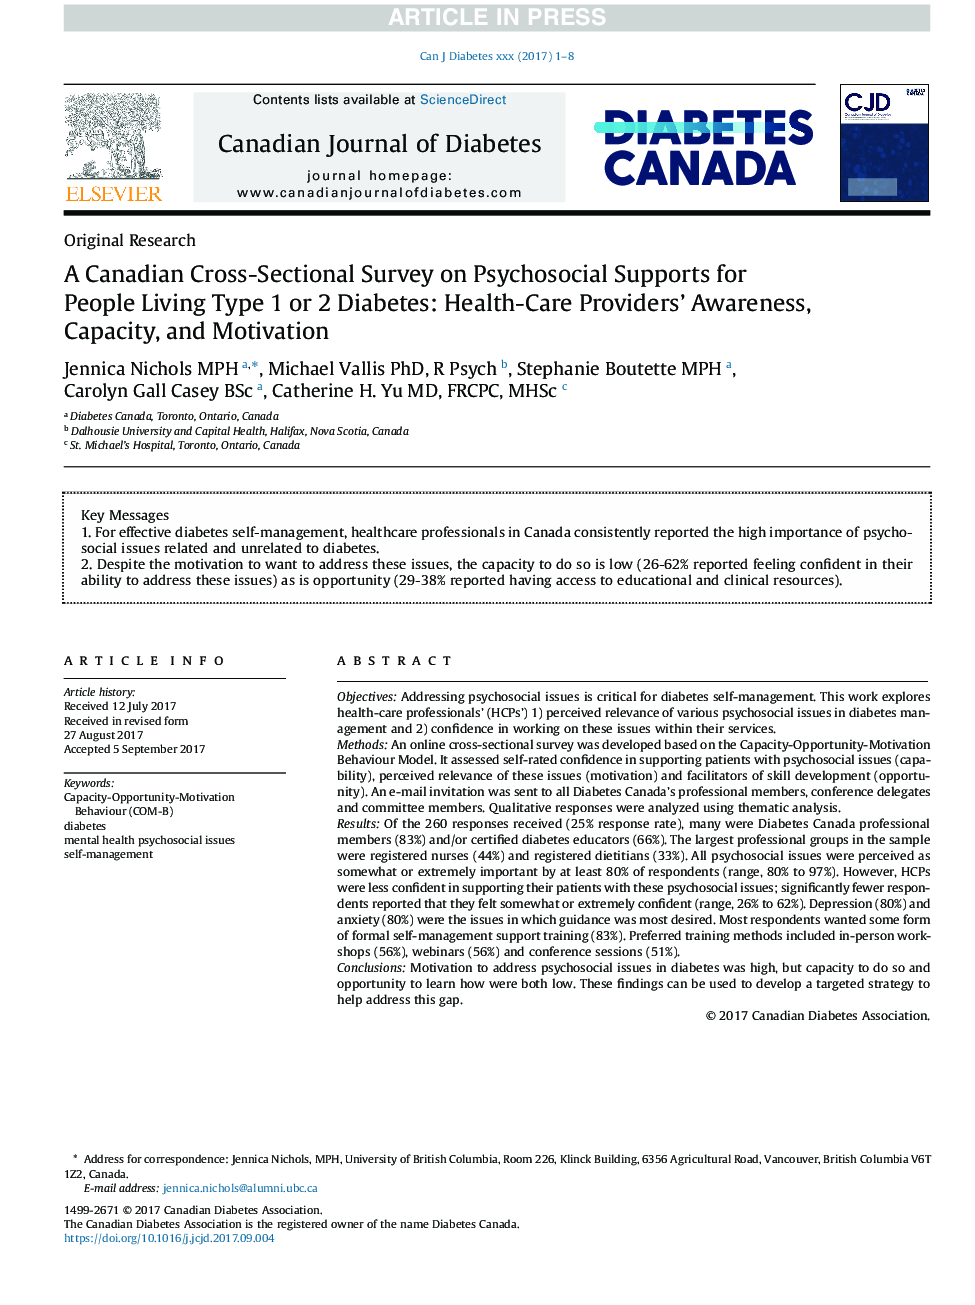 A Canadian Cross-Sectional Survey on Psychosocial Supports for Adults Living With Type 1 or 2 Diabetes: Health-Care Providers' Awareness, Capacity and Motivation